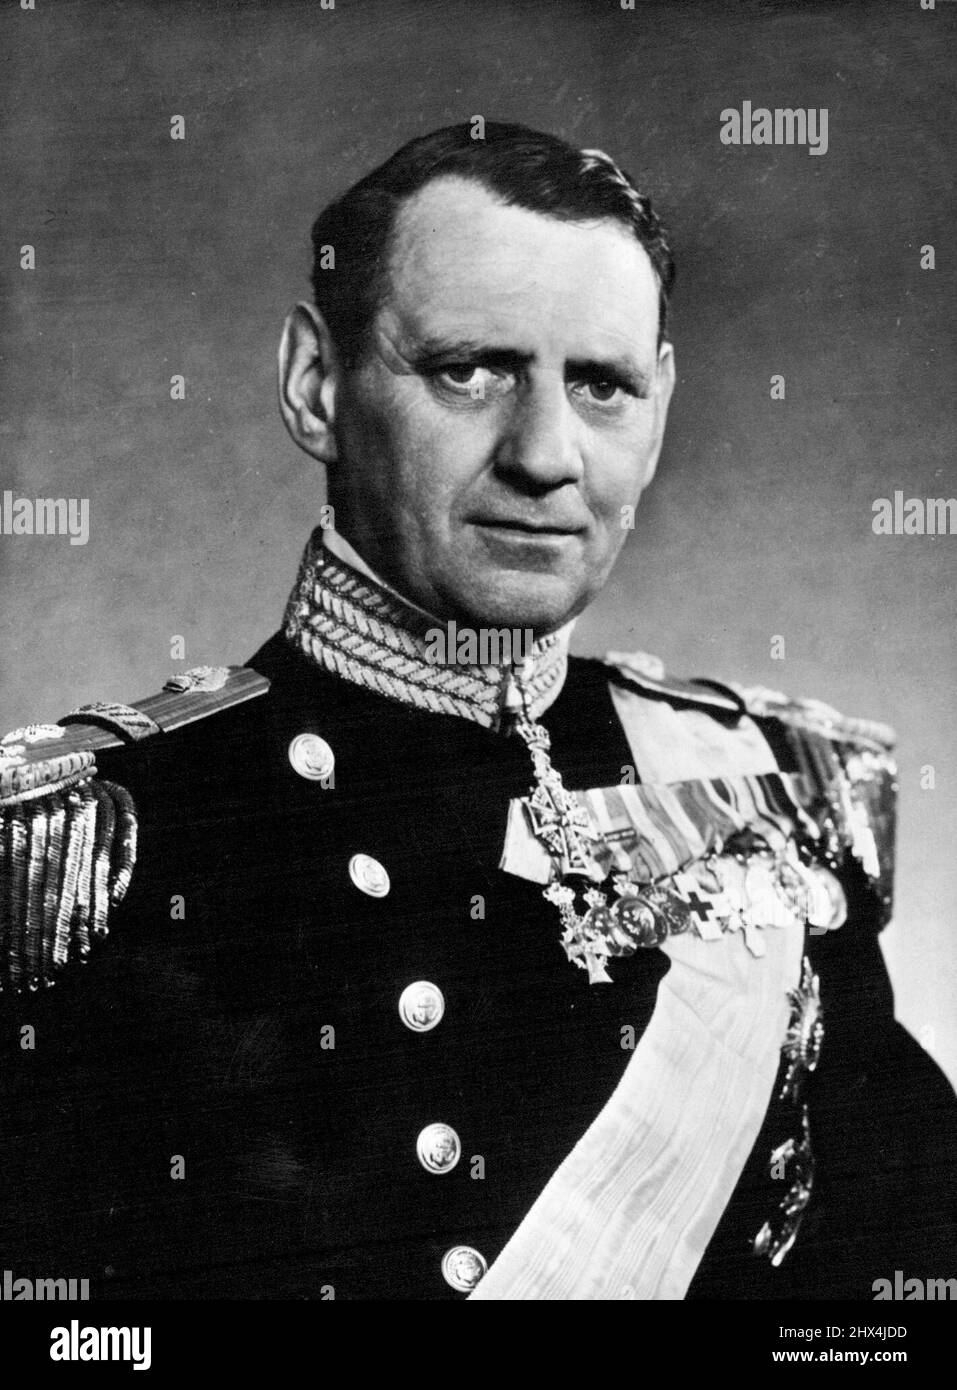 King Frederick IX of Denmark. Born on March 11th,1899, and succeeded to the throne April 20th, 1947, on the death of his father, King Christian X. On May 24th, 1935, he married Princess Ingrid of Sweden; they have three daughters. September 13, 1955. (Photo by Camera Press Ltd). Stock Photo